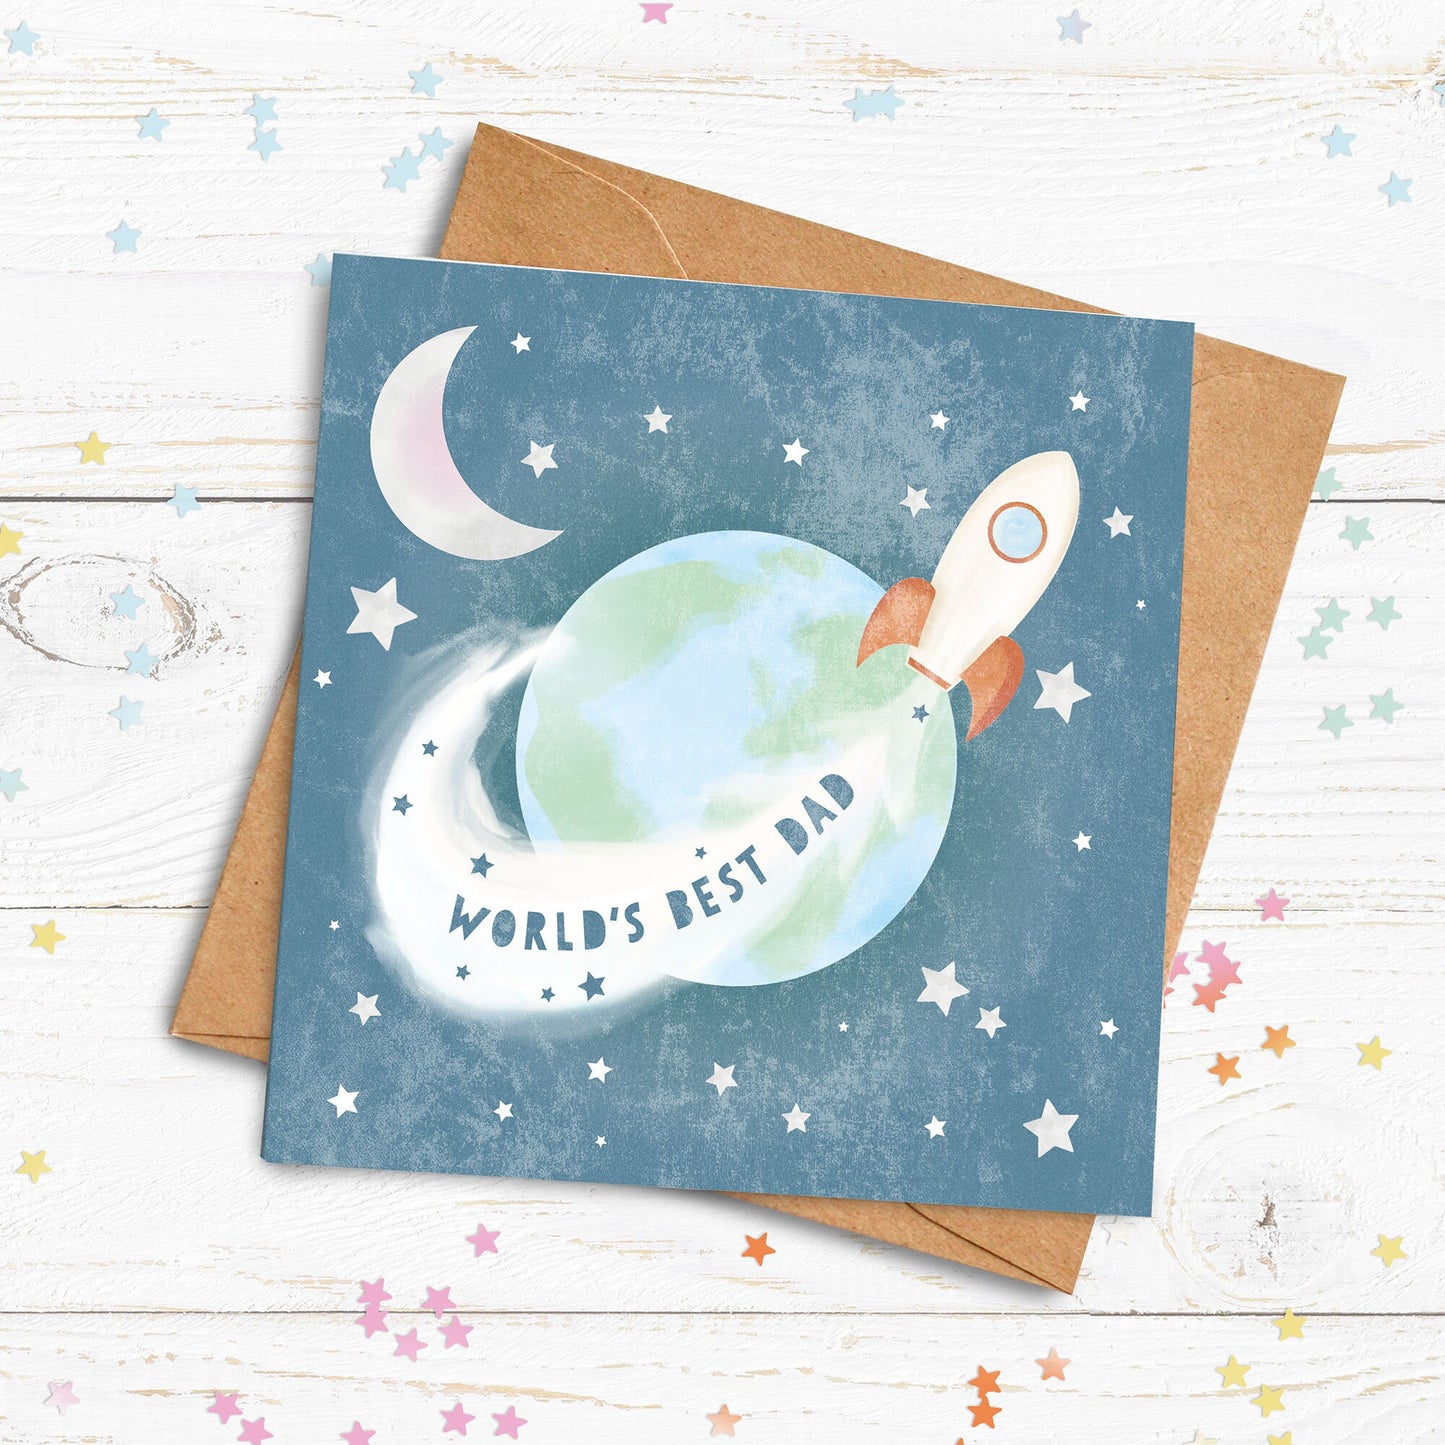 World's Best Dad, Grandad, Son, Uncle, Nephew, Step-dad Rocket Ship Card. Personalised Father's Day Card. Cute space. Send Direct Option.